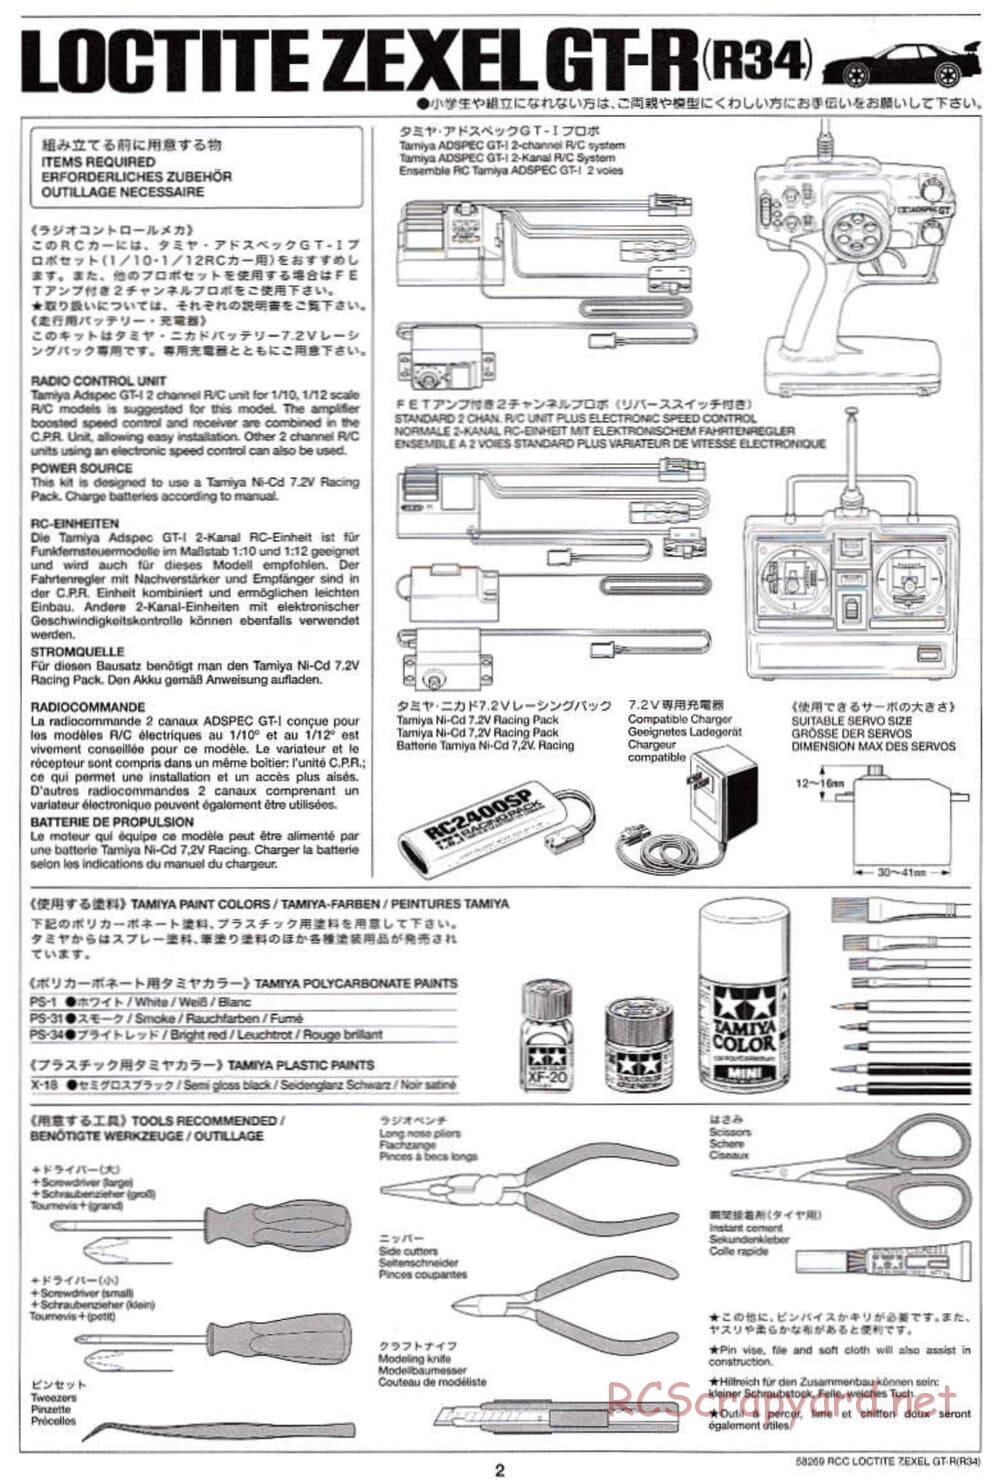 Tamiya - Loctite Zexel Skyline GT-R (R34) - TA-04 Chassis - Manual - Page 2